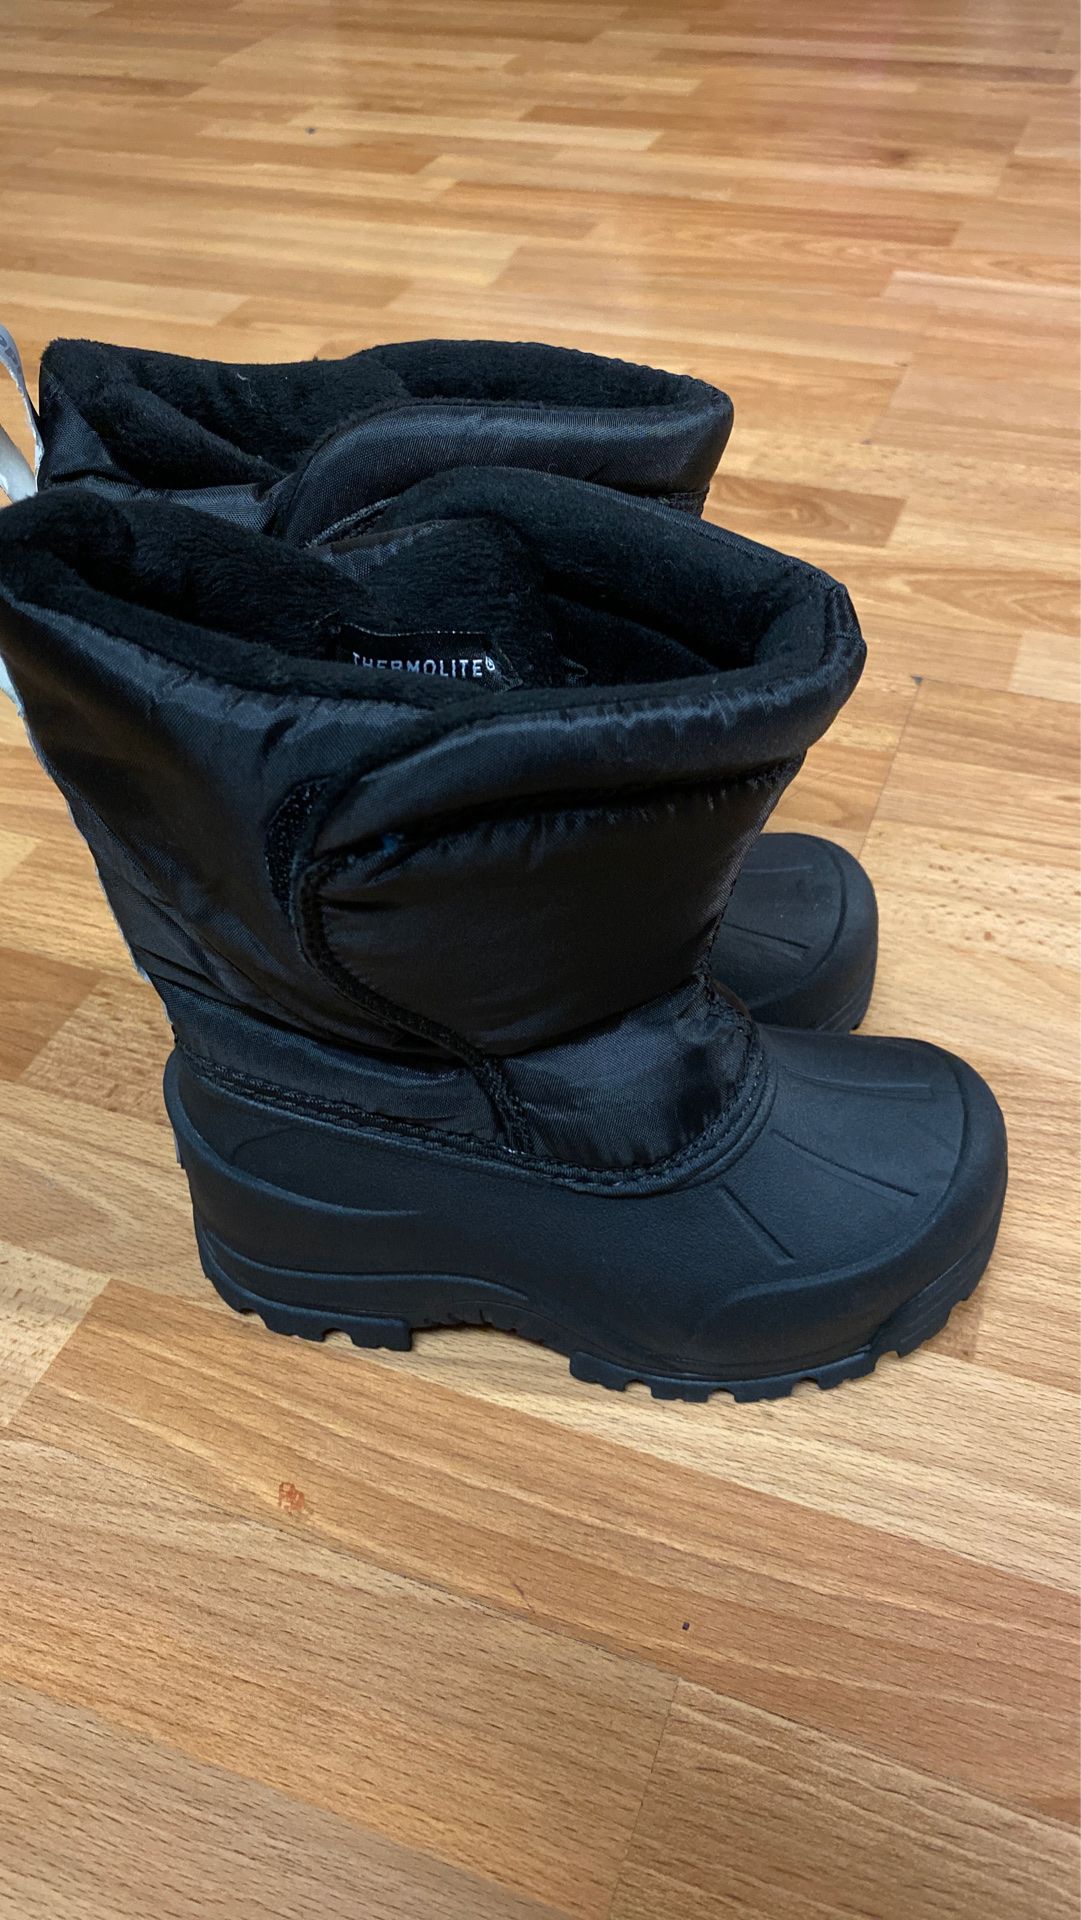 The Northside toddler little kid size 10 snow boots